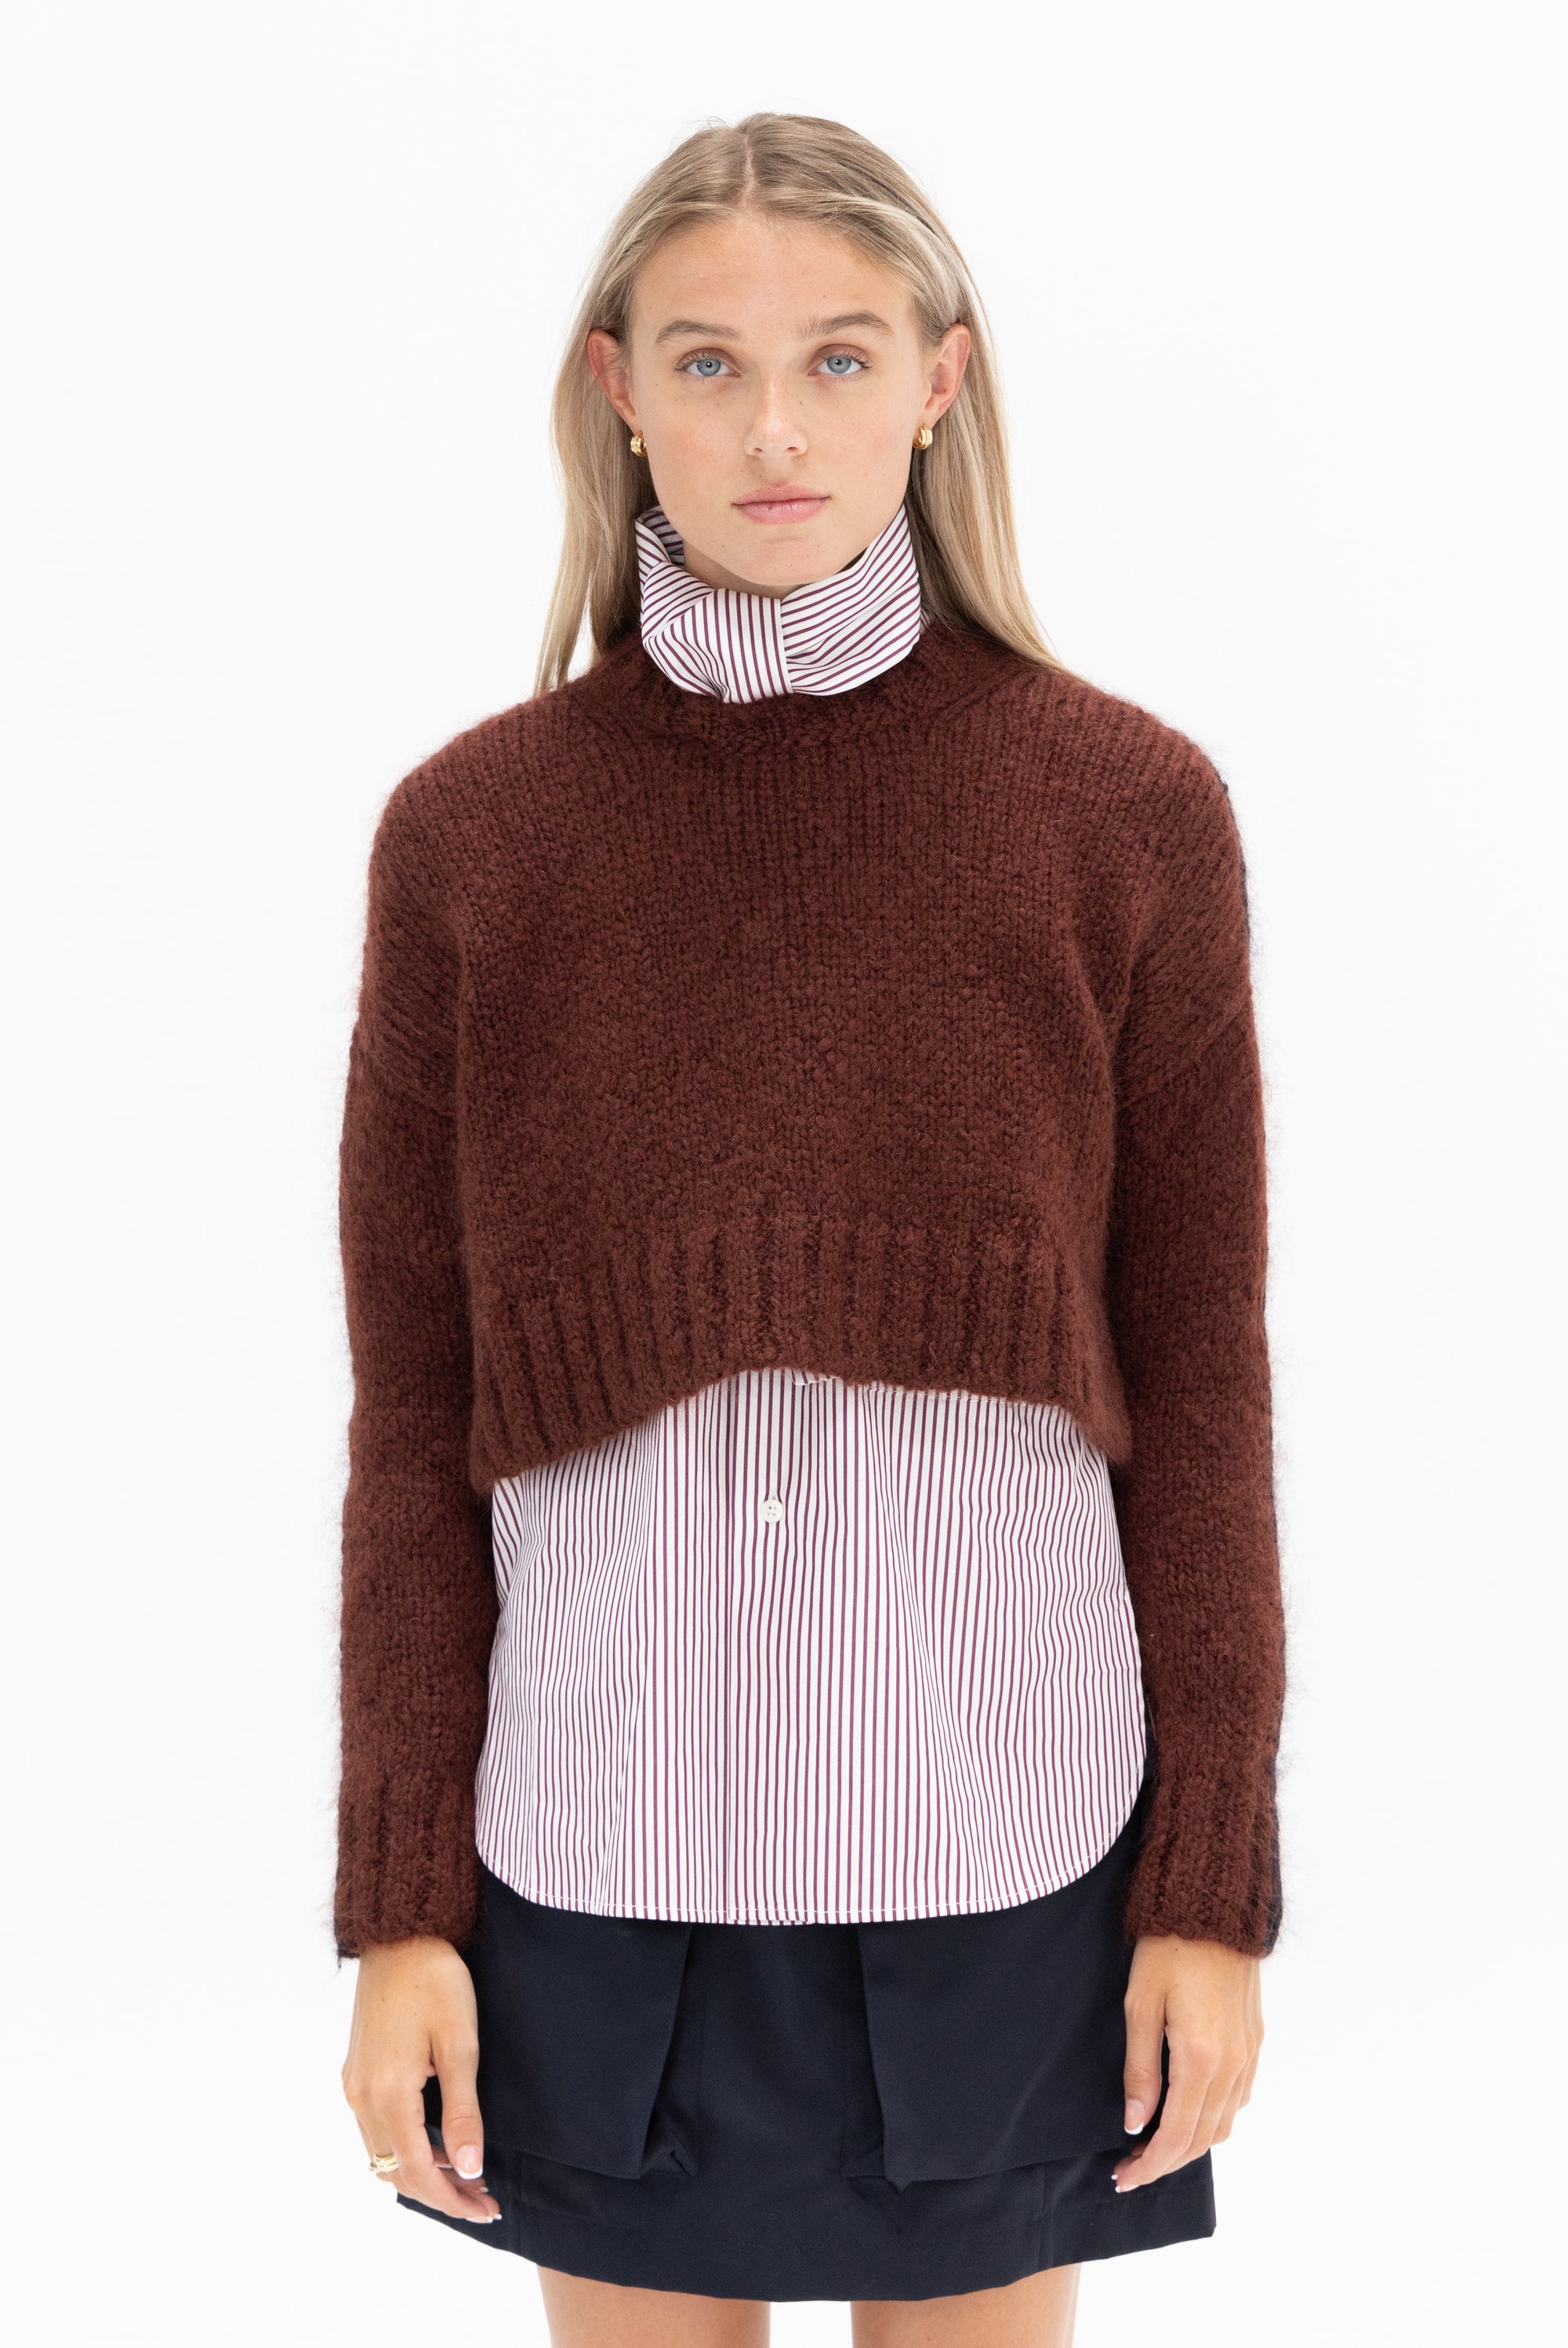 PLAN C - Long Sleeve Crew Neck Knit, Brown and Blue